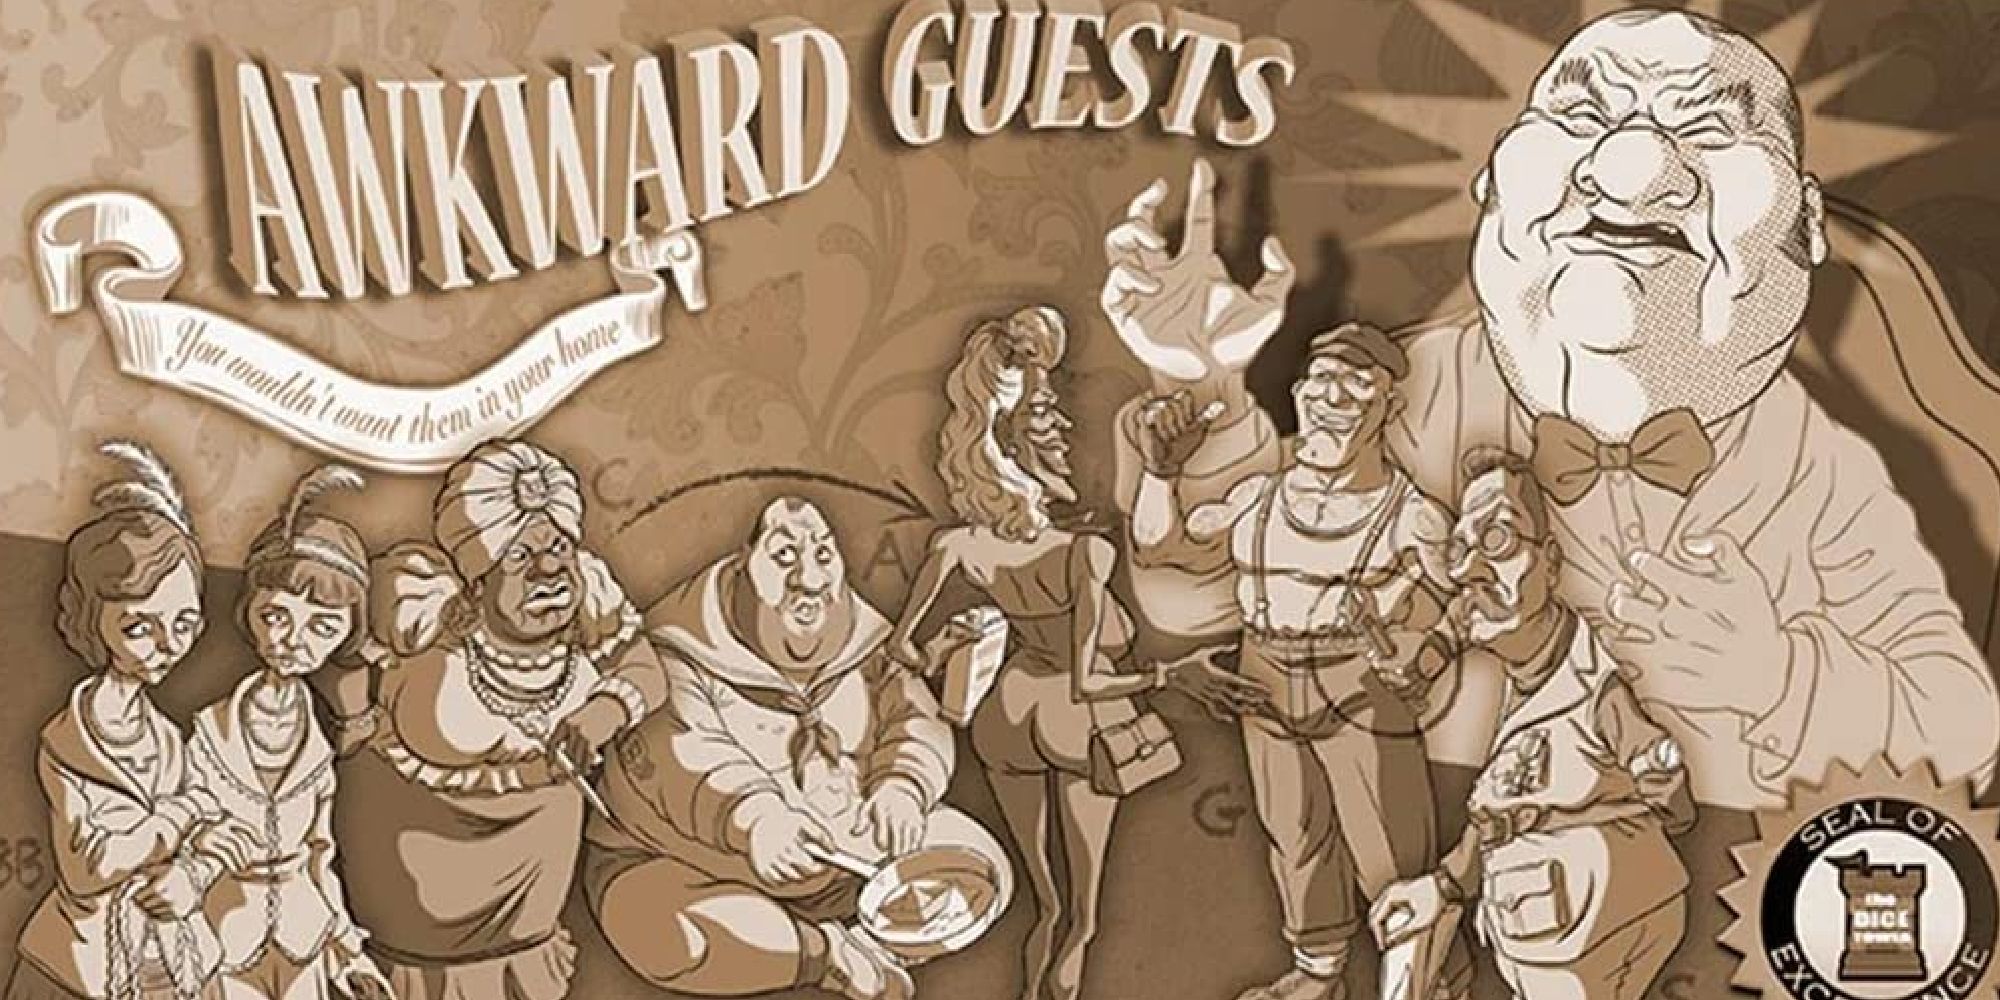 The box art for Awkward Guests, showing a group of suspects in sepia tone 